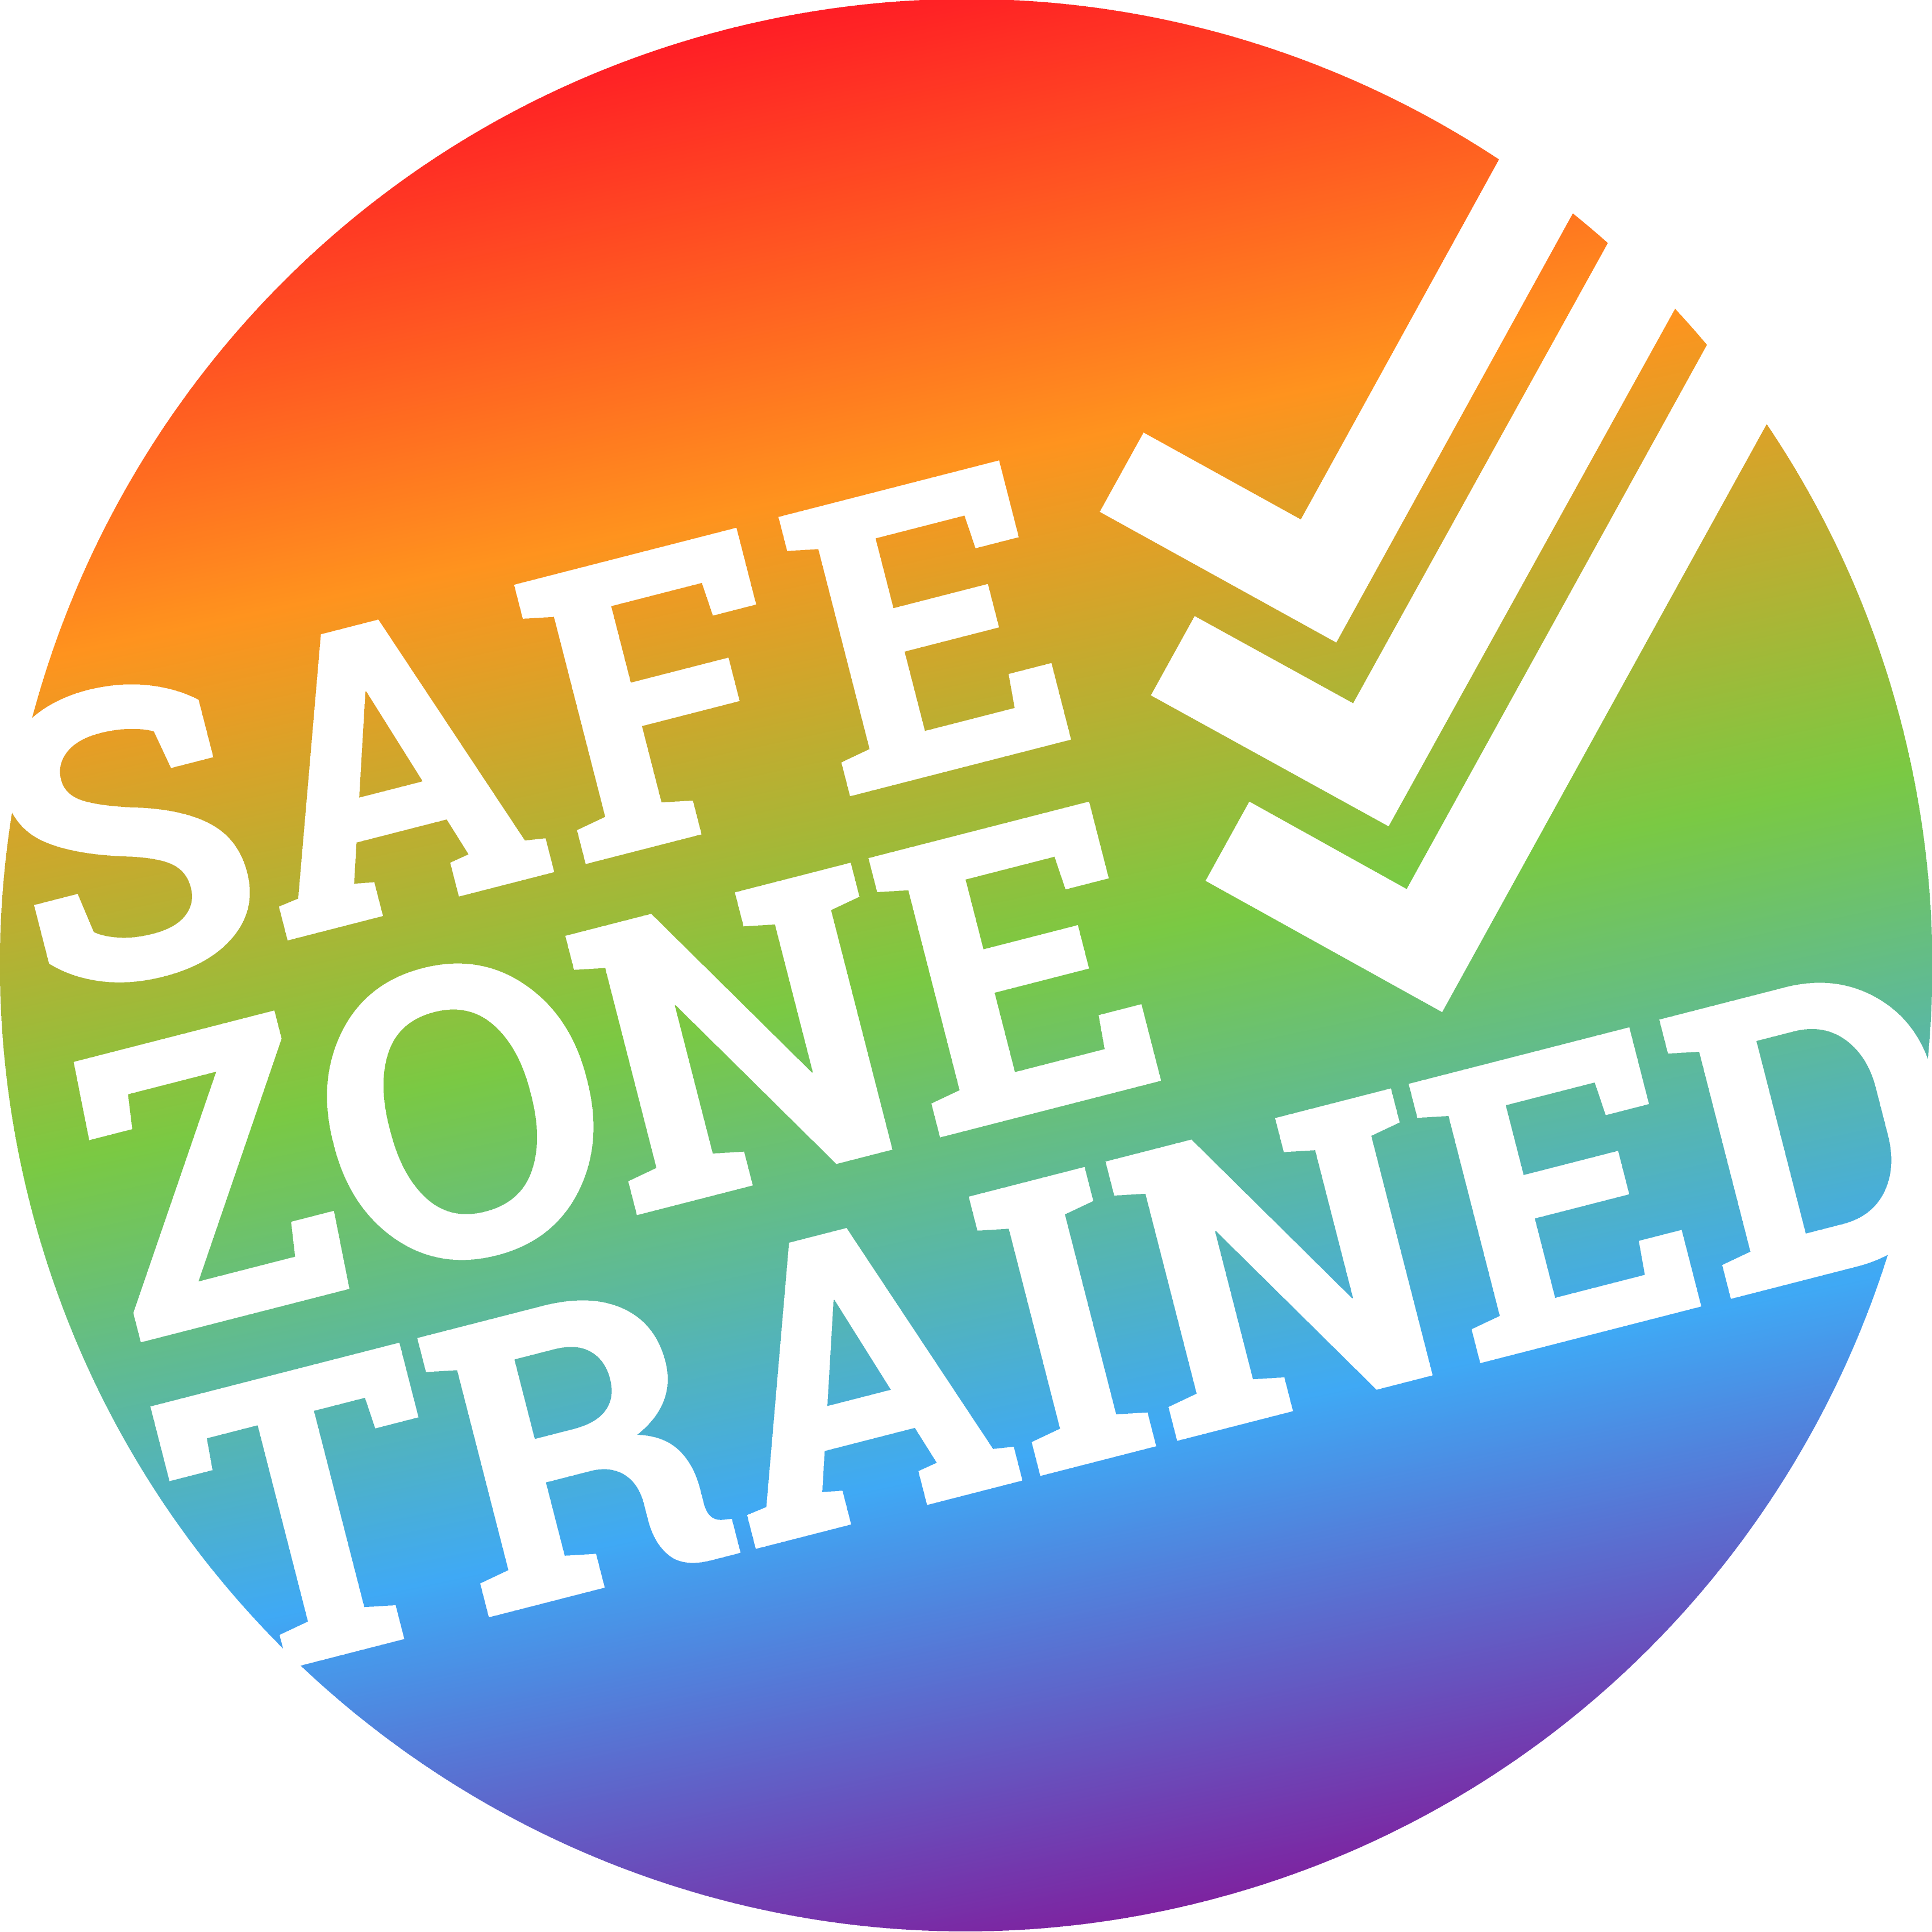 What is Safe Zone? » The Safe Zone Project